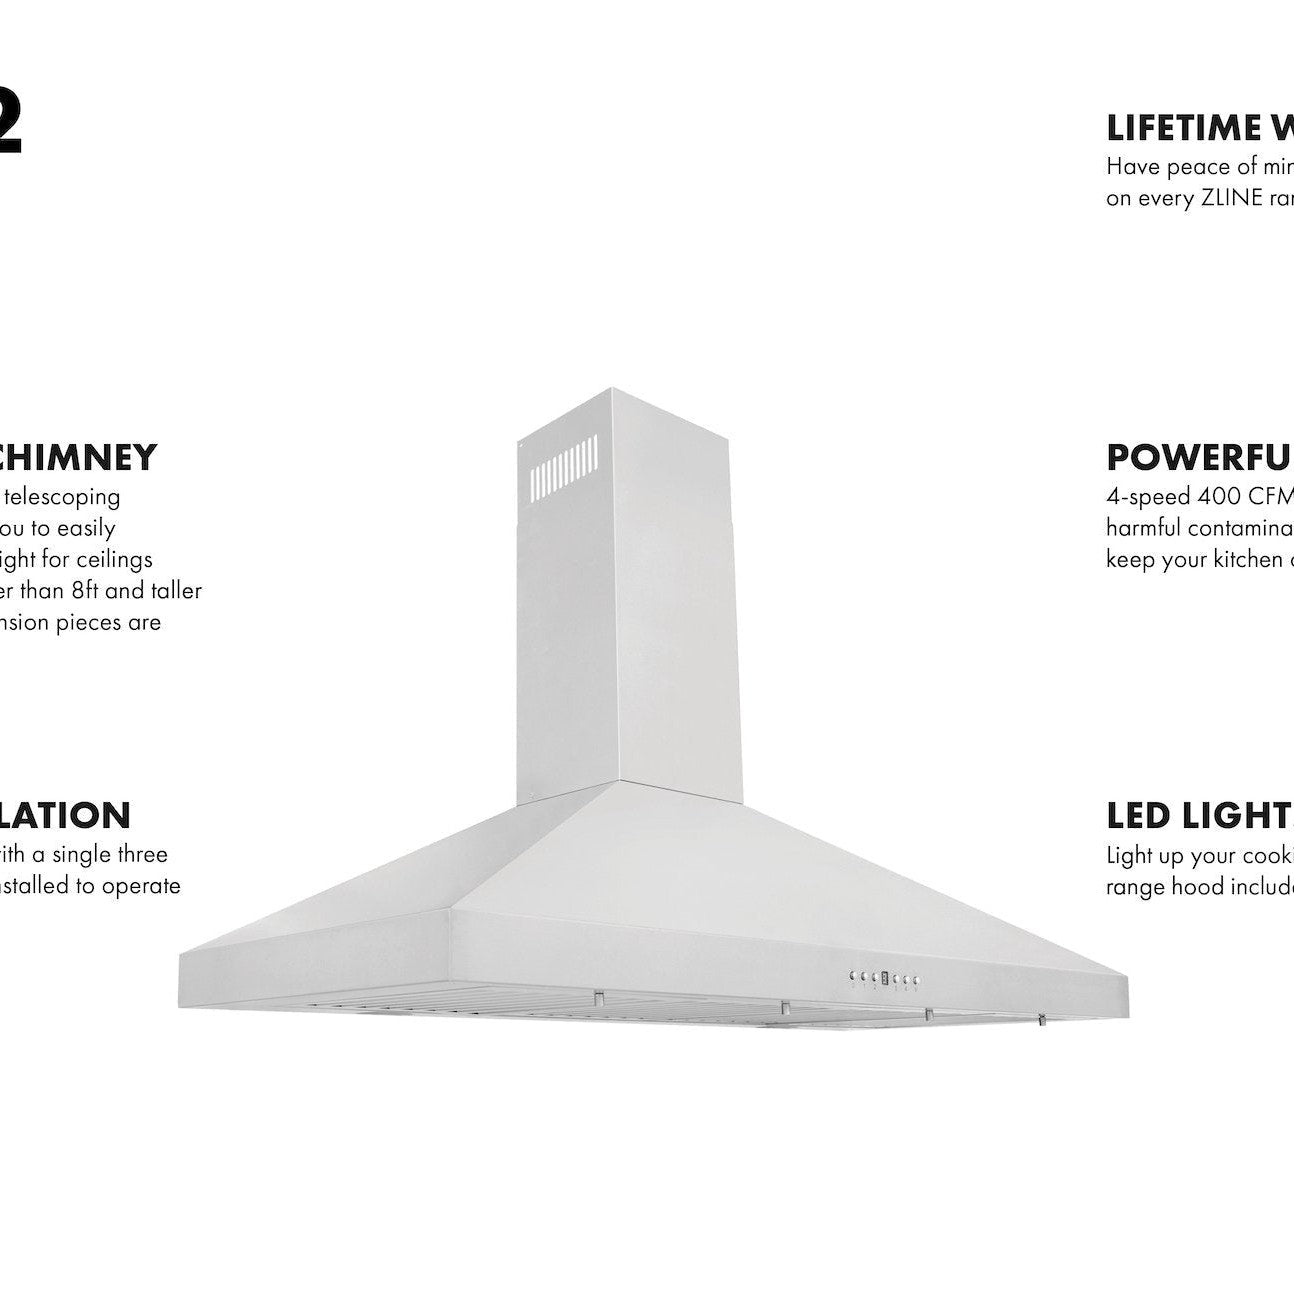 KL3-42 features lifetime warranty, LED lights, telescoping chimney, simple installation, and powerful motor.